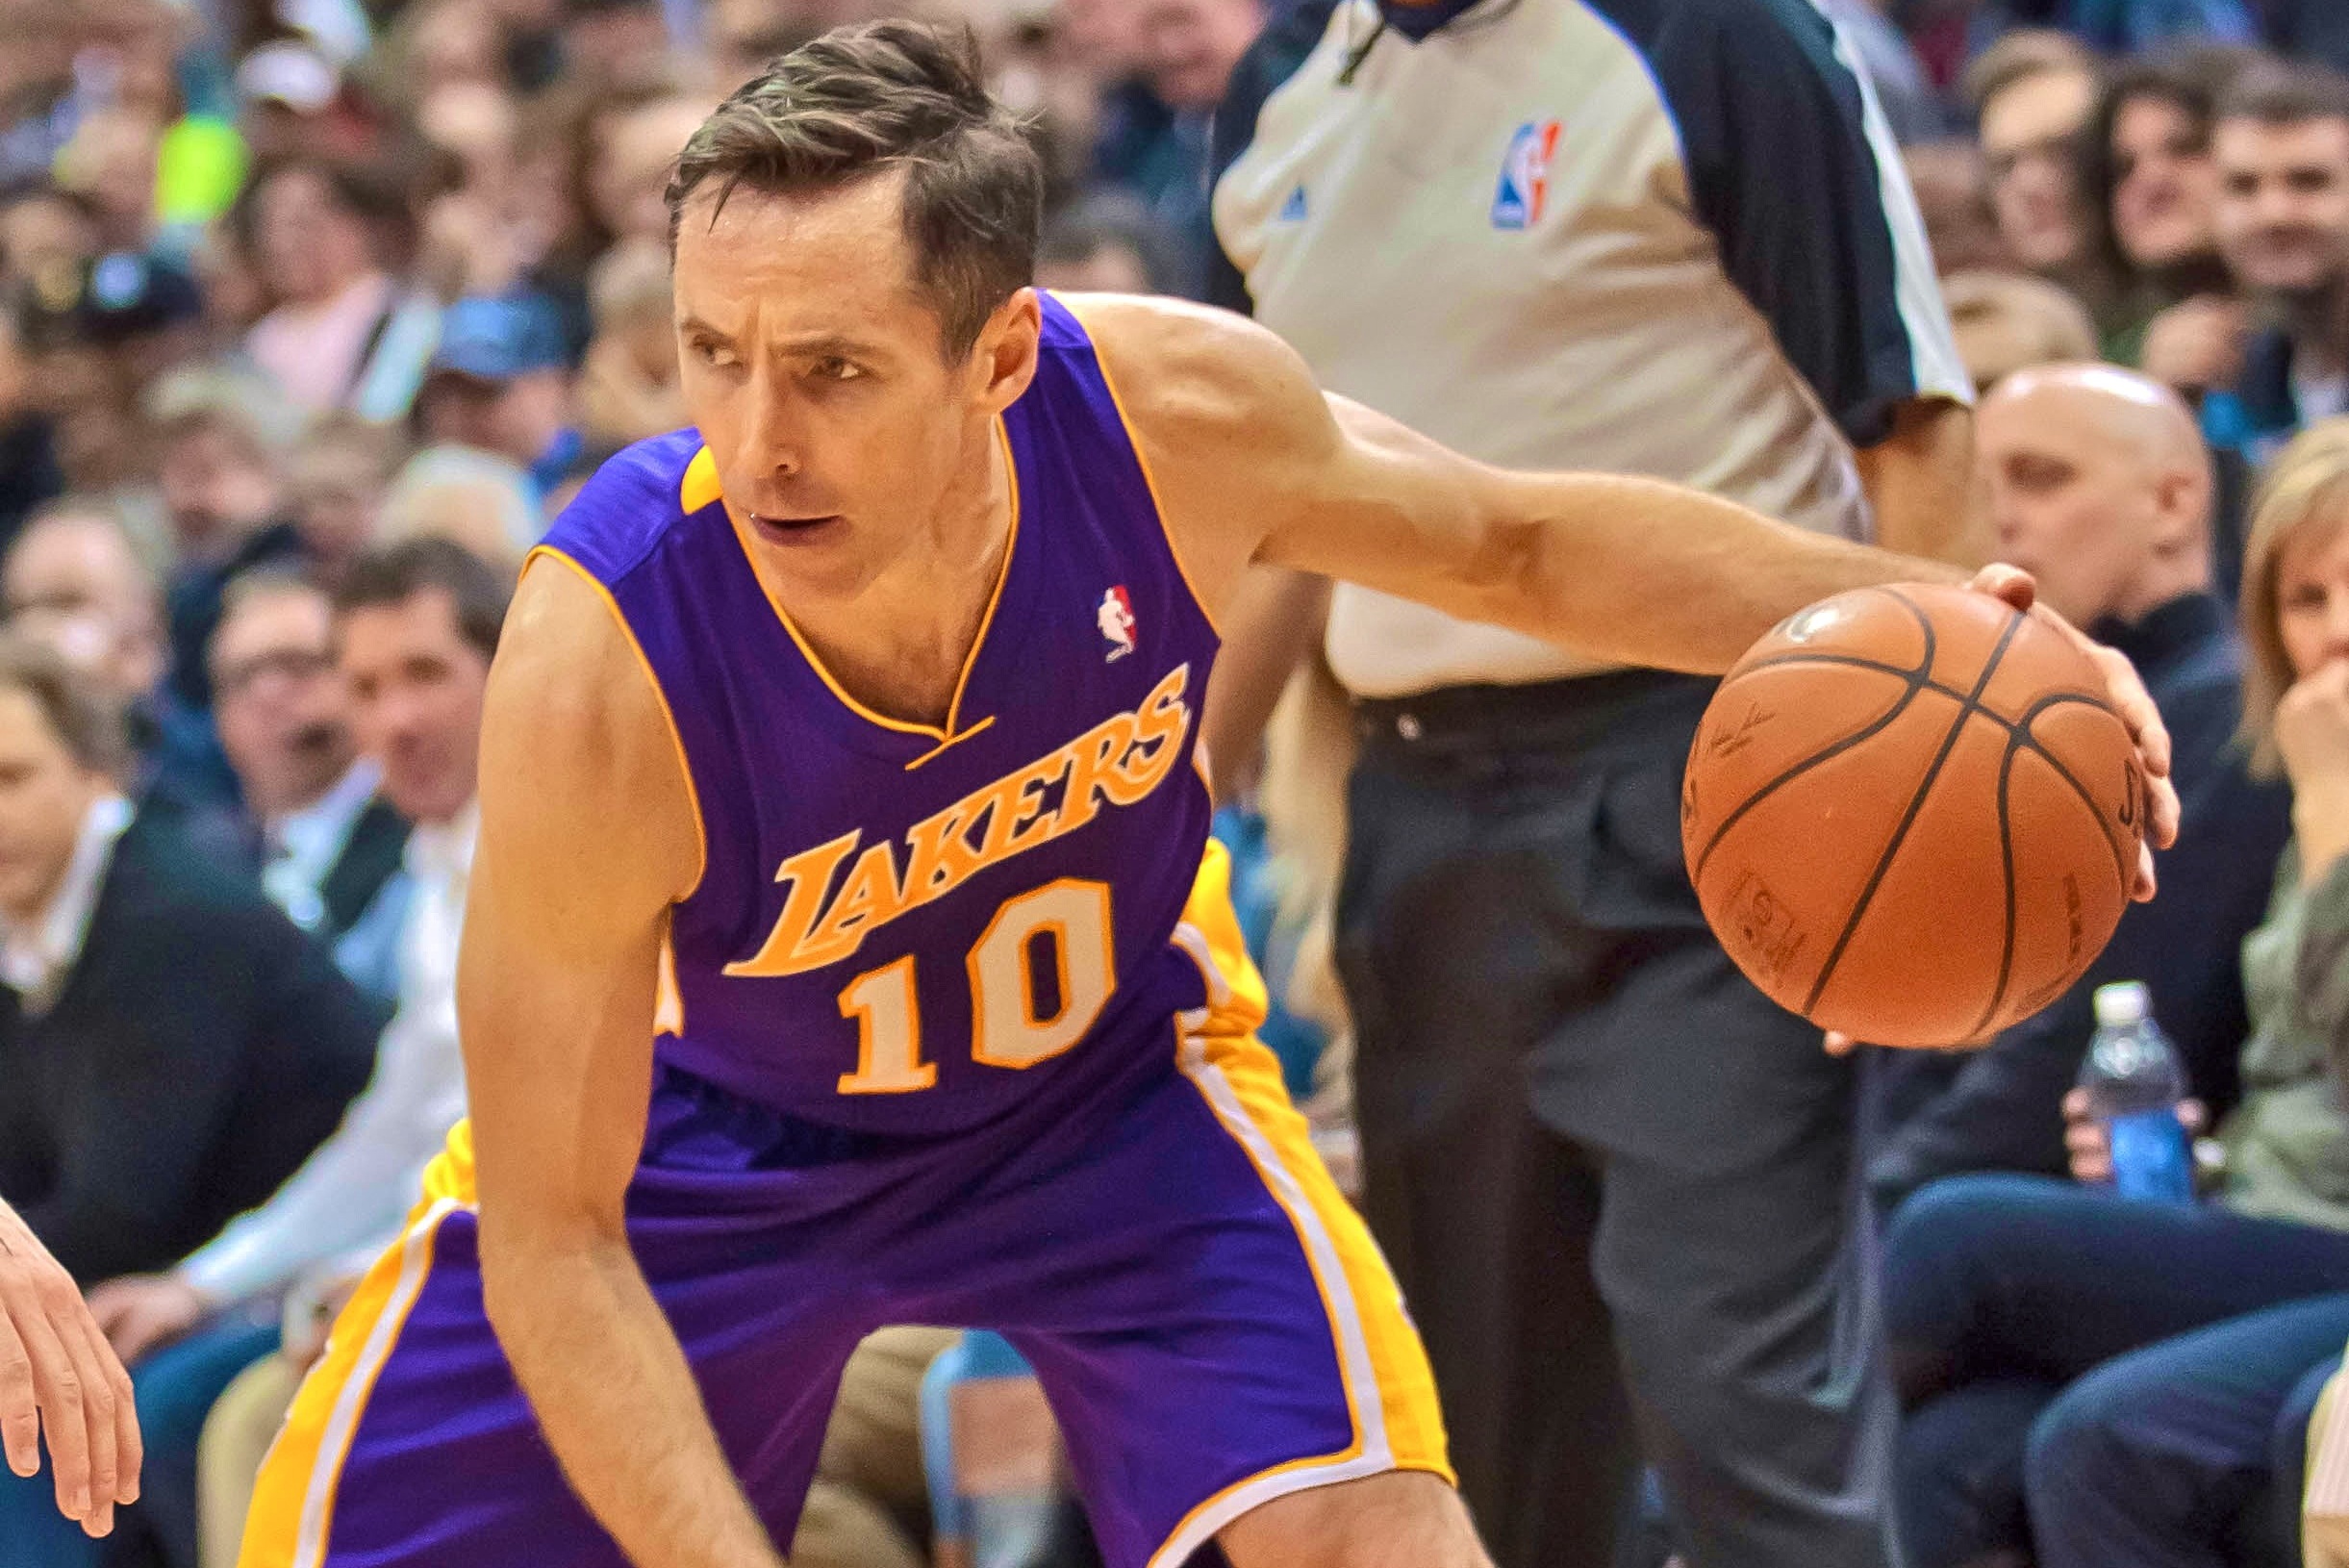 Steve Nash adjusting to new role on Lakers as he nears age 40 